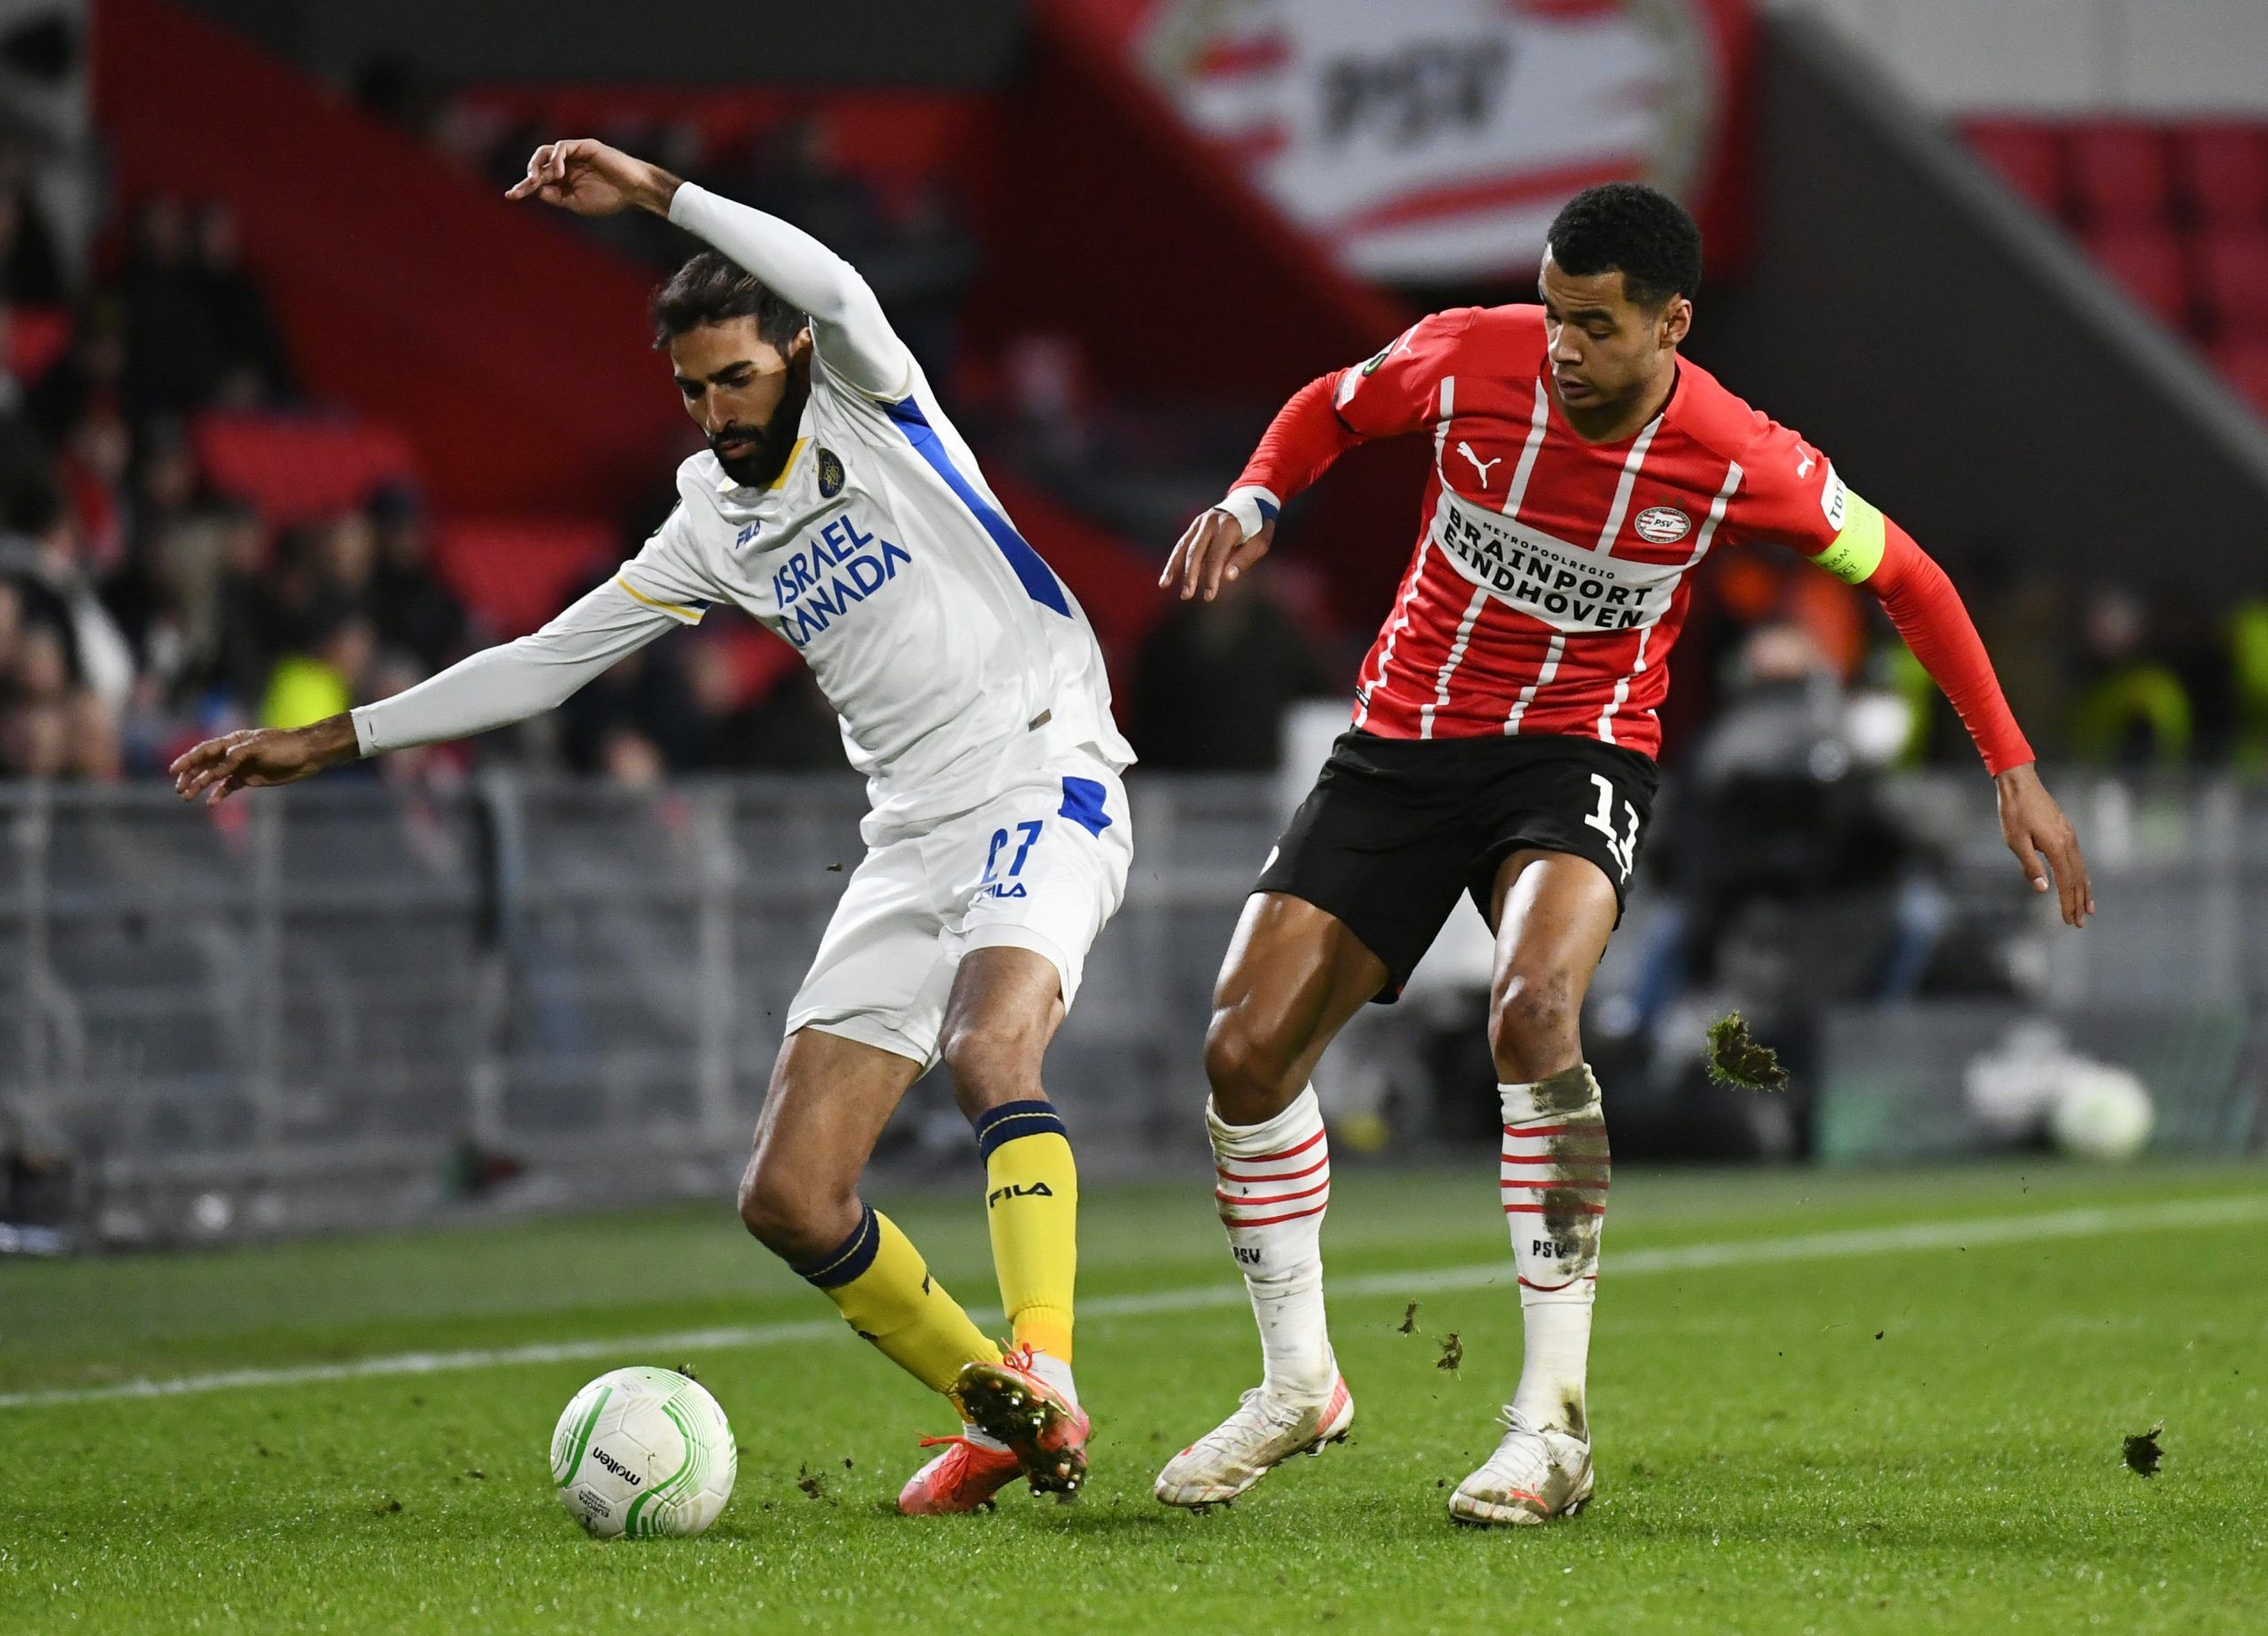 Soccer Football - Europa Conference League - Play Off First Leg - PSV Eindhoven v Maccabi Tel-Aviv - Philips Stadion, Eindhoven, Netherlands - February 17, 2022 Maccabi Tel Aviv's Ofir Davidadze in action with PSV Eindhoven's Cody Gakpo REUTERS/Piroschka Van De Wouw